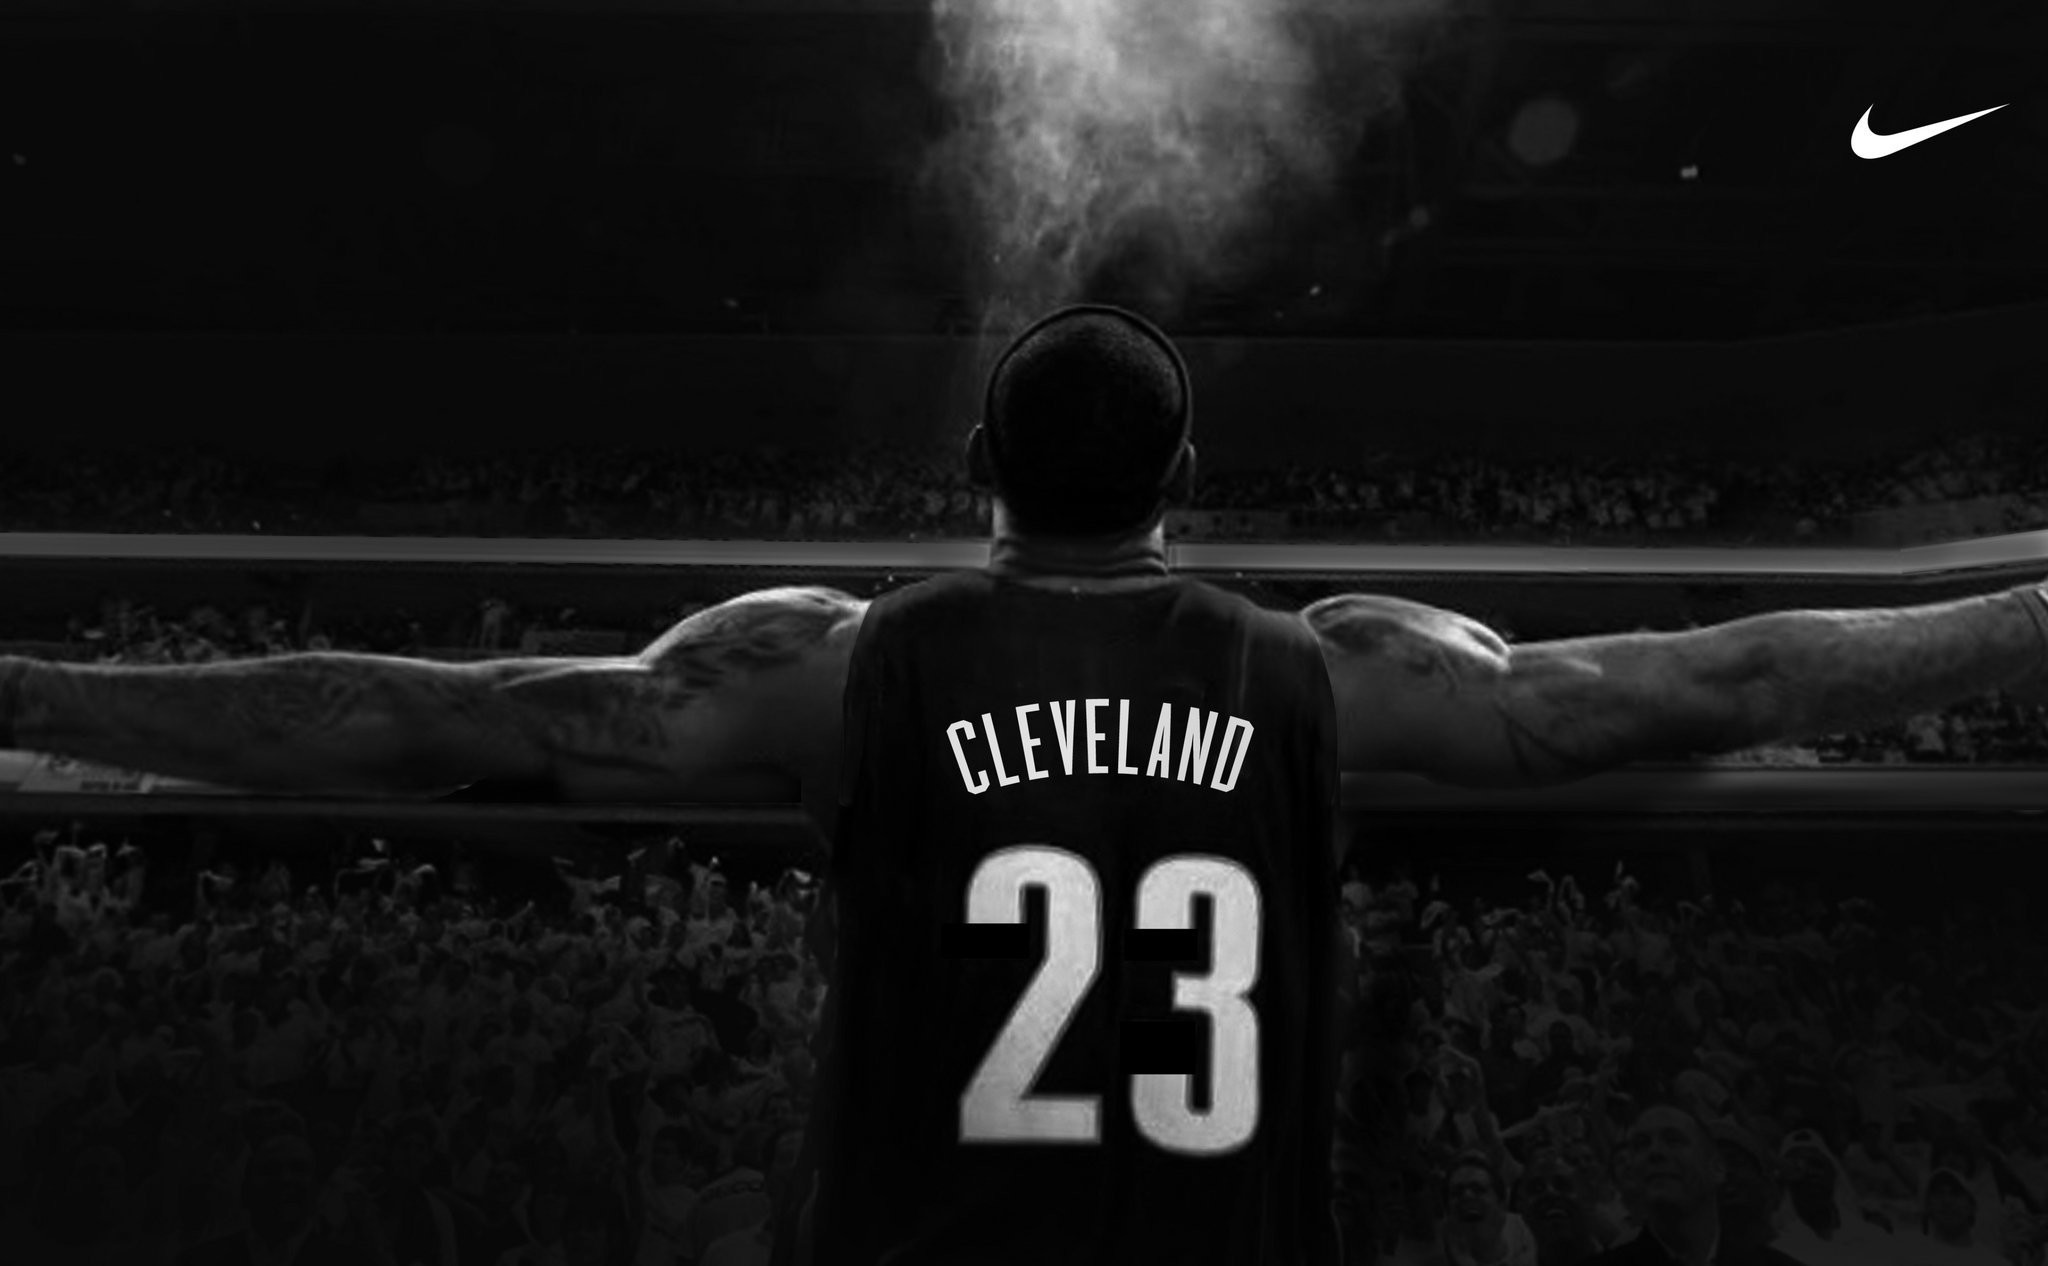 2048x1266 Lebron James Cleveland Cavaliers Wallpaper High Quality.